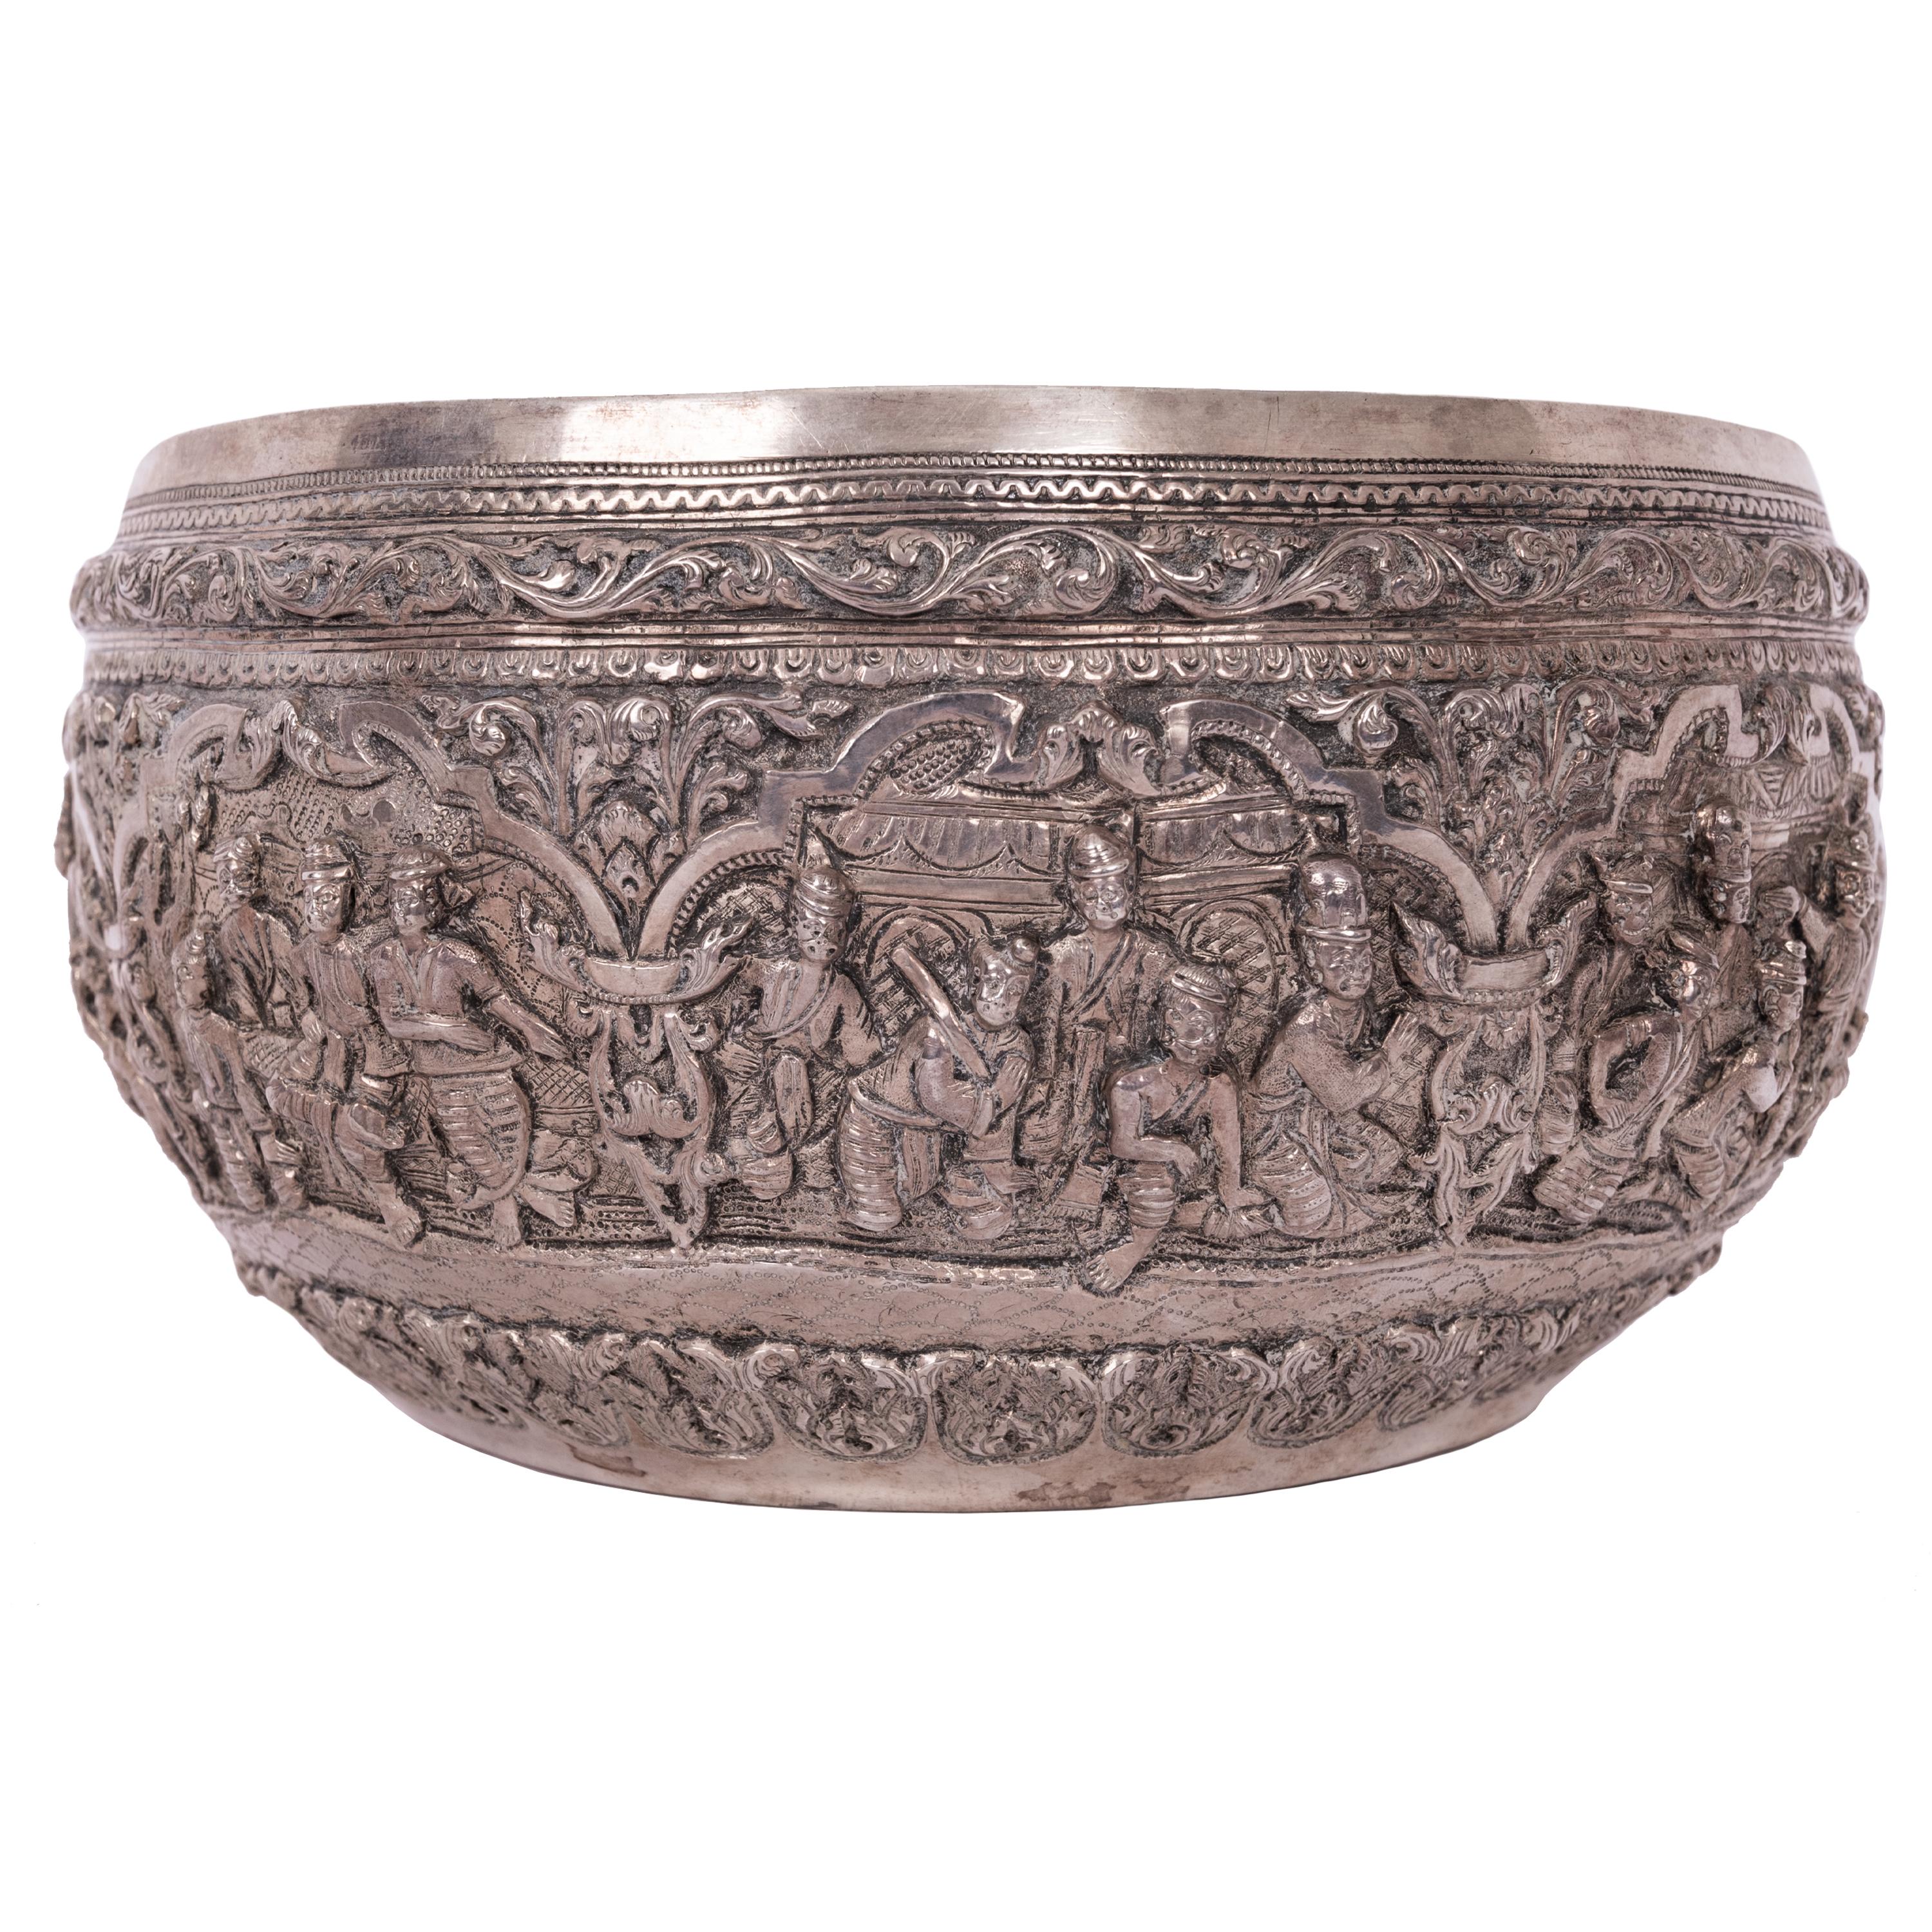 Anglo-Indian Antique Burmese Repousse Silver Buddhist Thabeik Offering Bowl Guanyin Mark 1890 For Sale